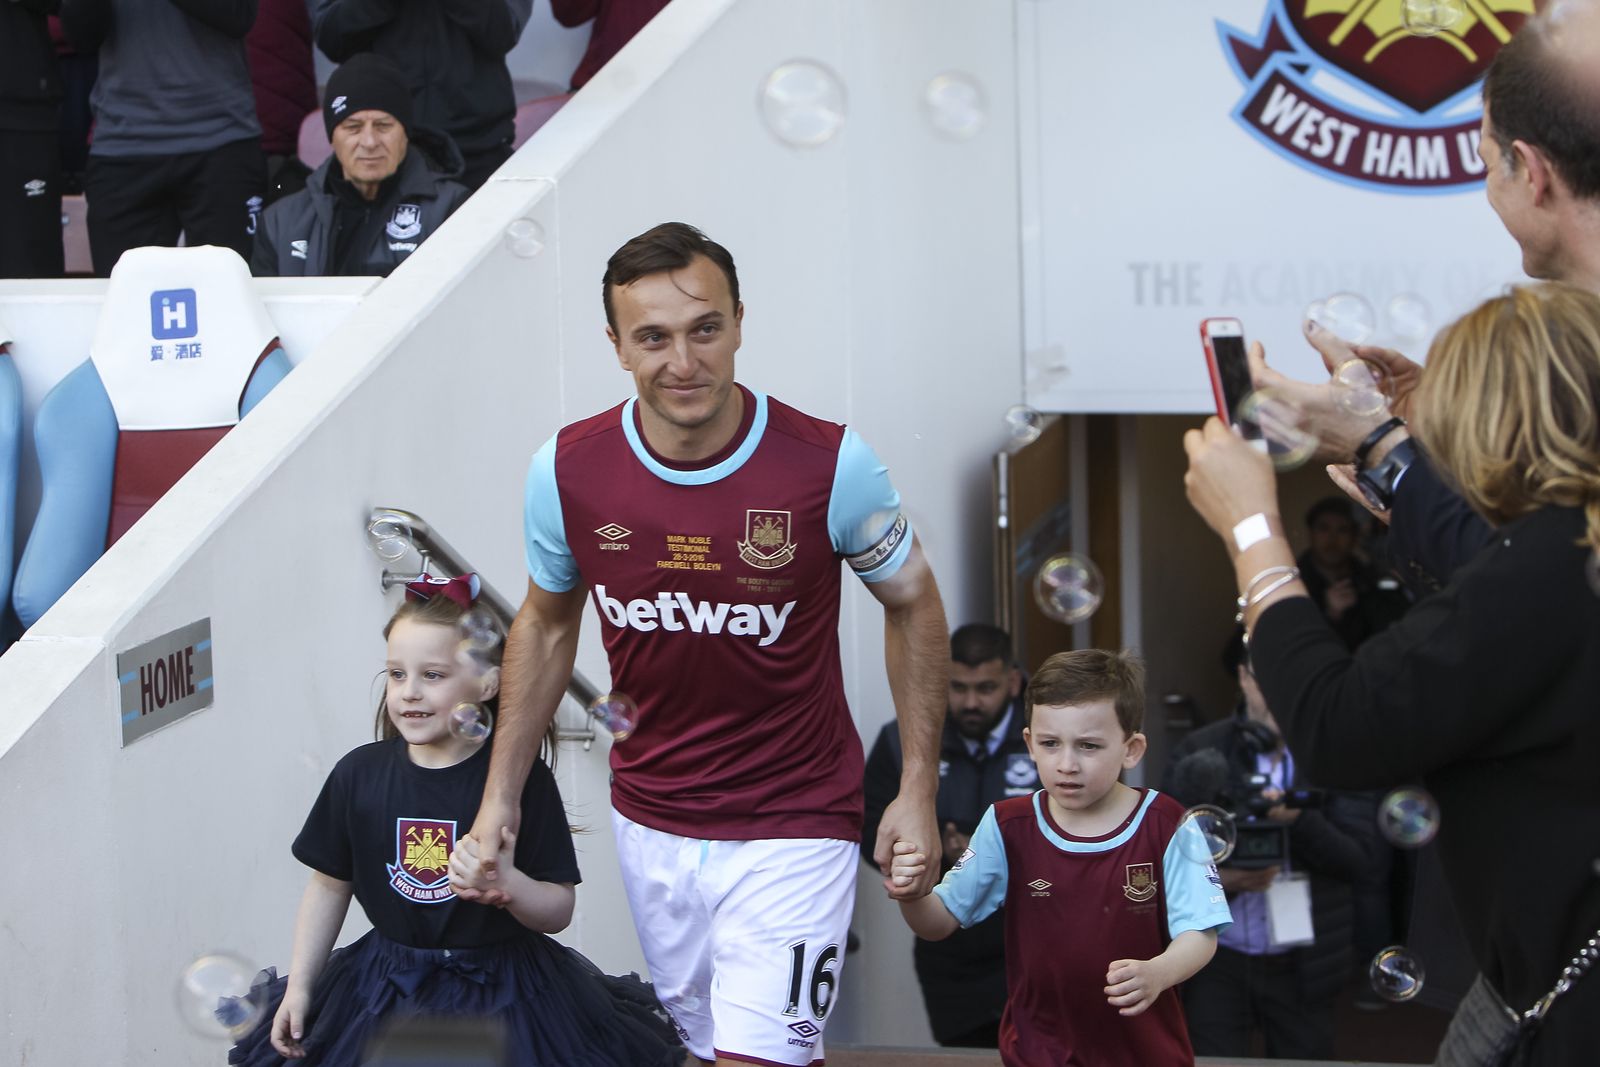 Mark Noble walks out before his testimonial. I feel the photo tells the story quite well: the ‘Home’ sign, his kids, bubbles, and his glance over to his wife and manager Slaven Bilic. (70mm, ISO400, 1/640th, f4)